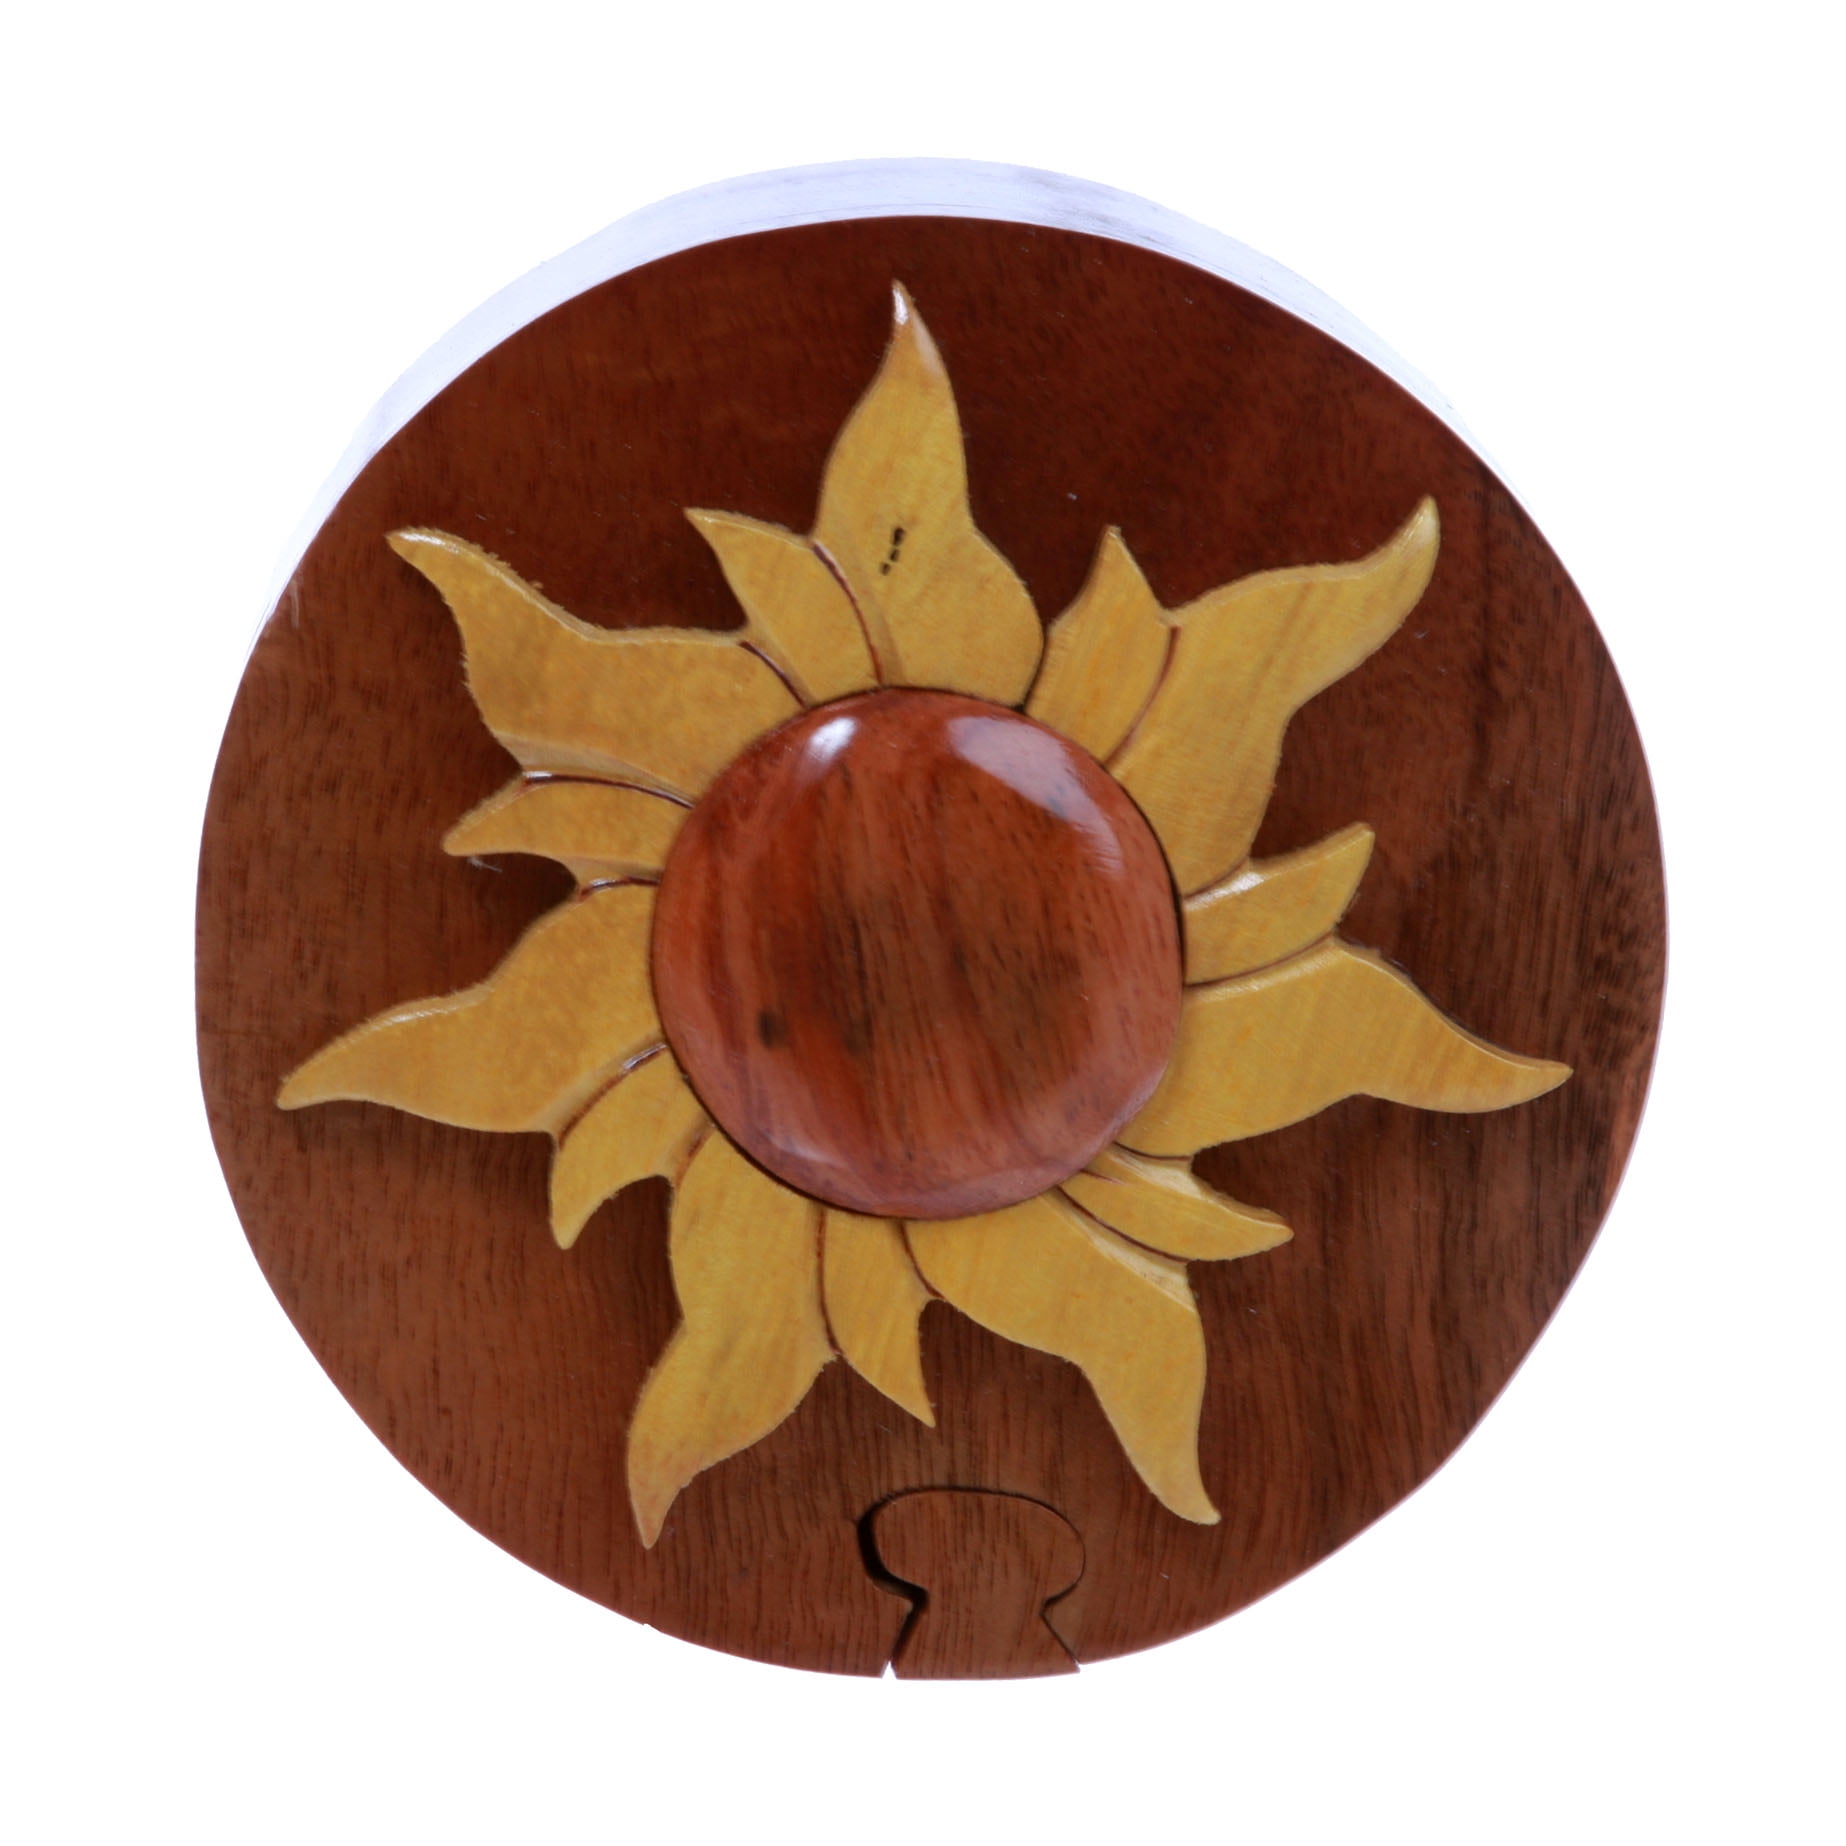 Handcrafted Wooden Flower Shape Secret Jewelry Puzzle Box 